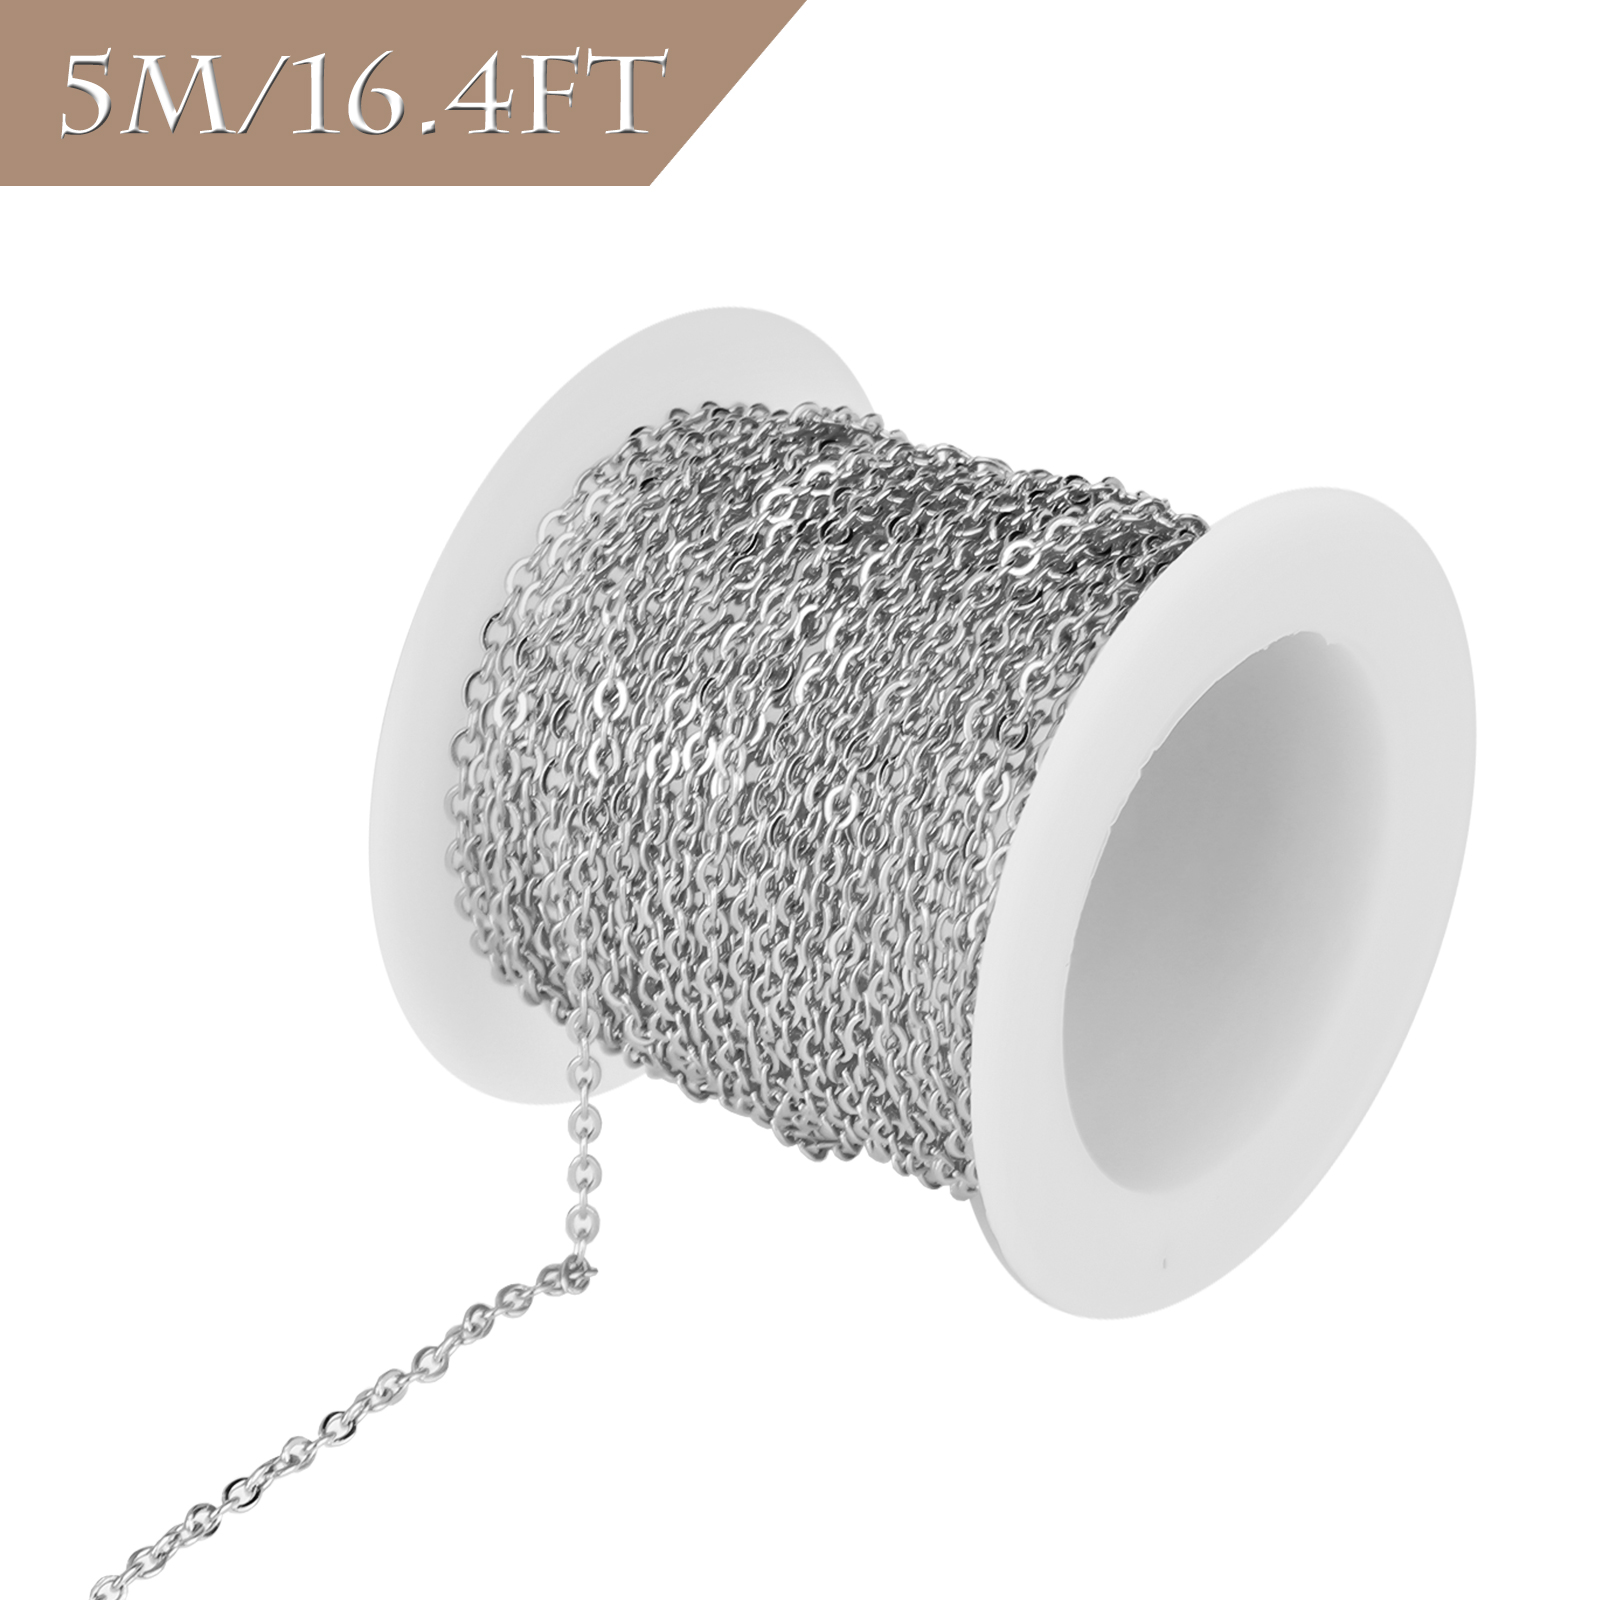 Color:Silver 1PCS:5m/16.4ft Stainless Steel Jewelry Making Chain Necklace Charm Pendant Link Cable